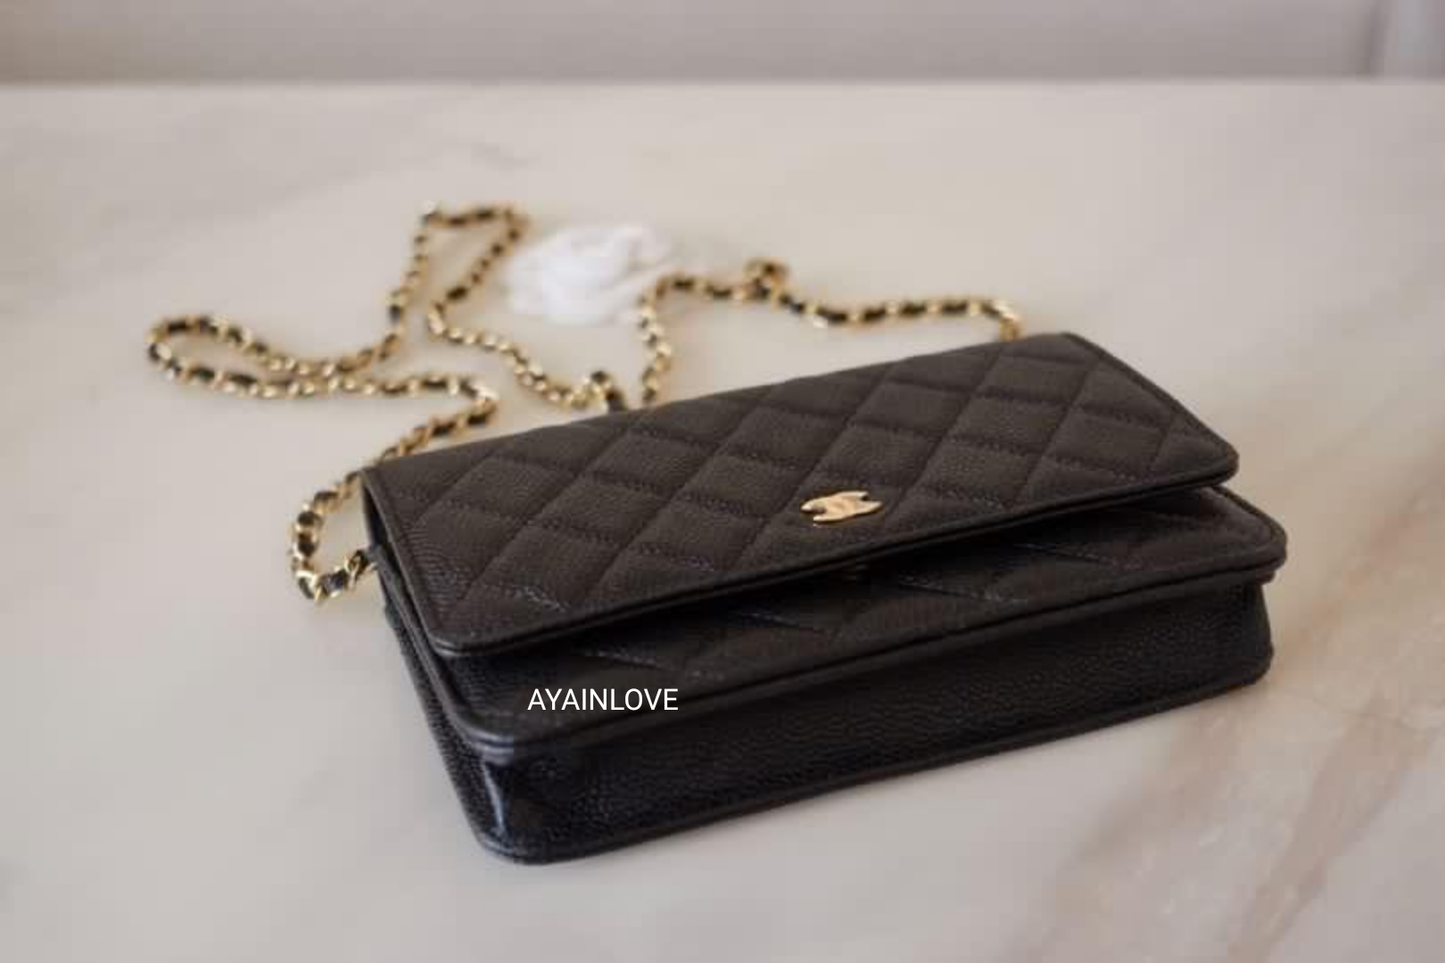 BLACK CAVIAR CLASSIC WALLET ON CHAIN GOLD HARDWARE *NEW*